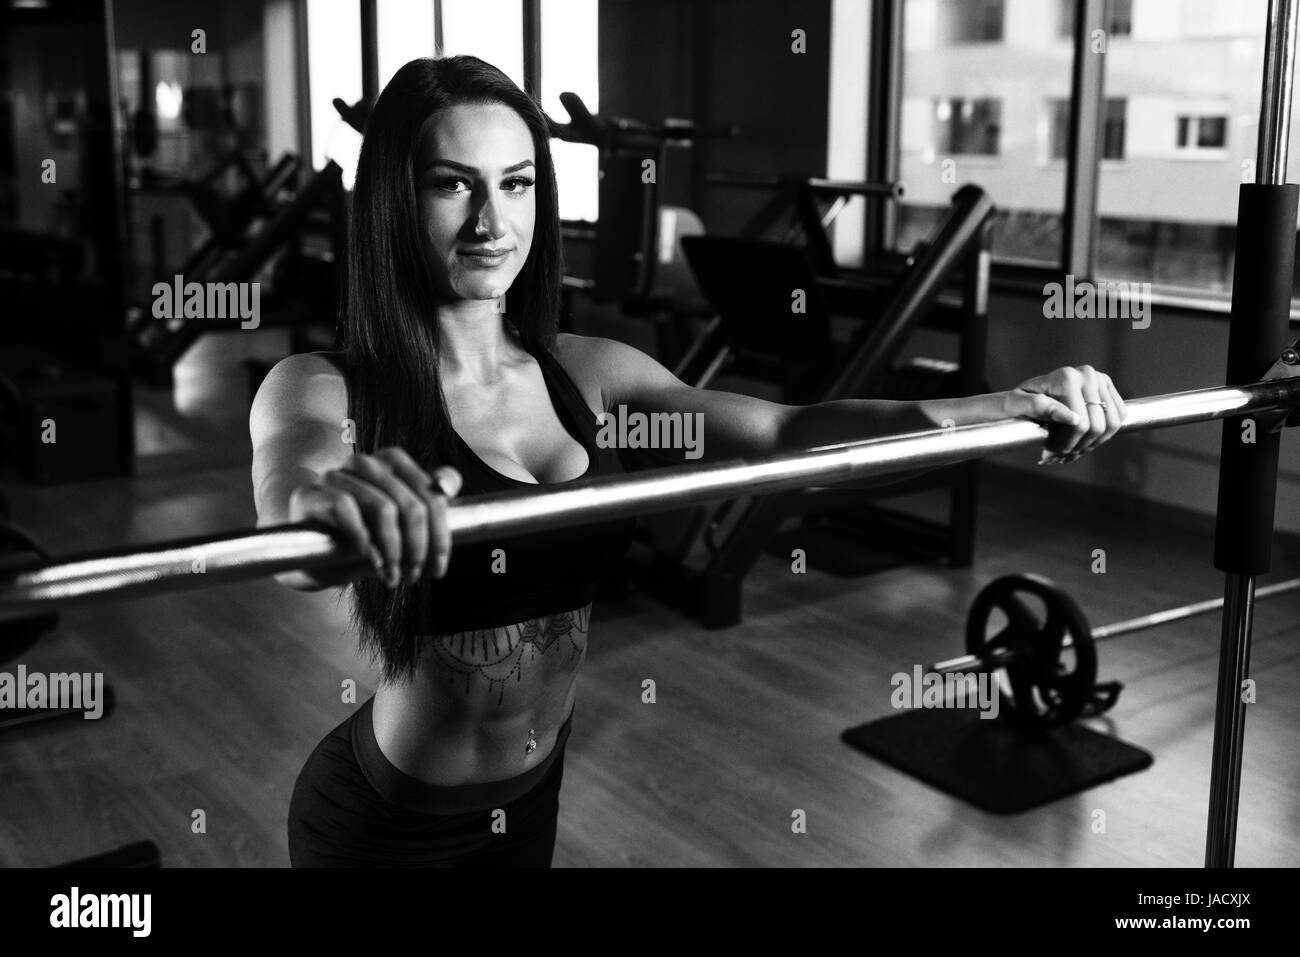 Healthy Fitness Woman Preparing To Working Out Legs With Barbell In A Gym - Squat Exercise Stock Photo